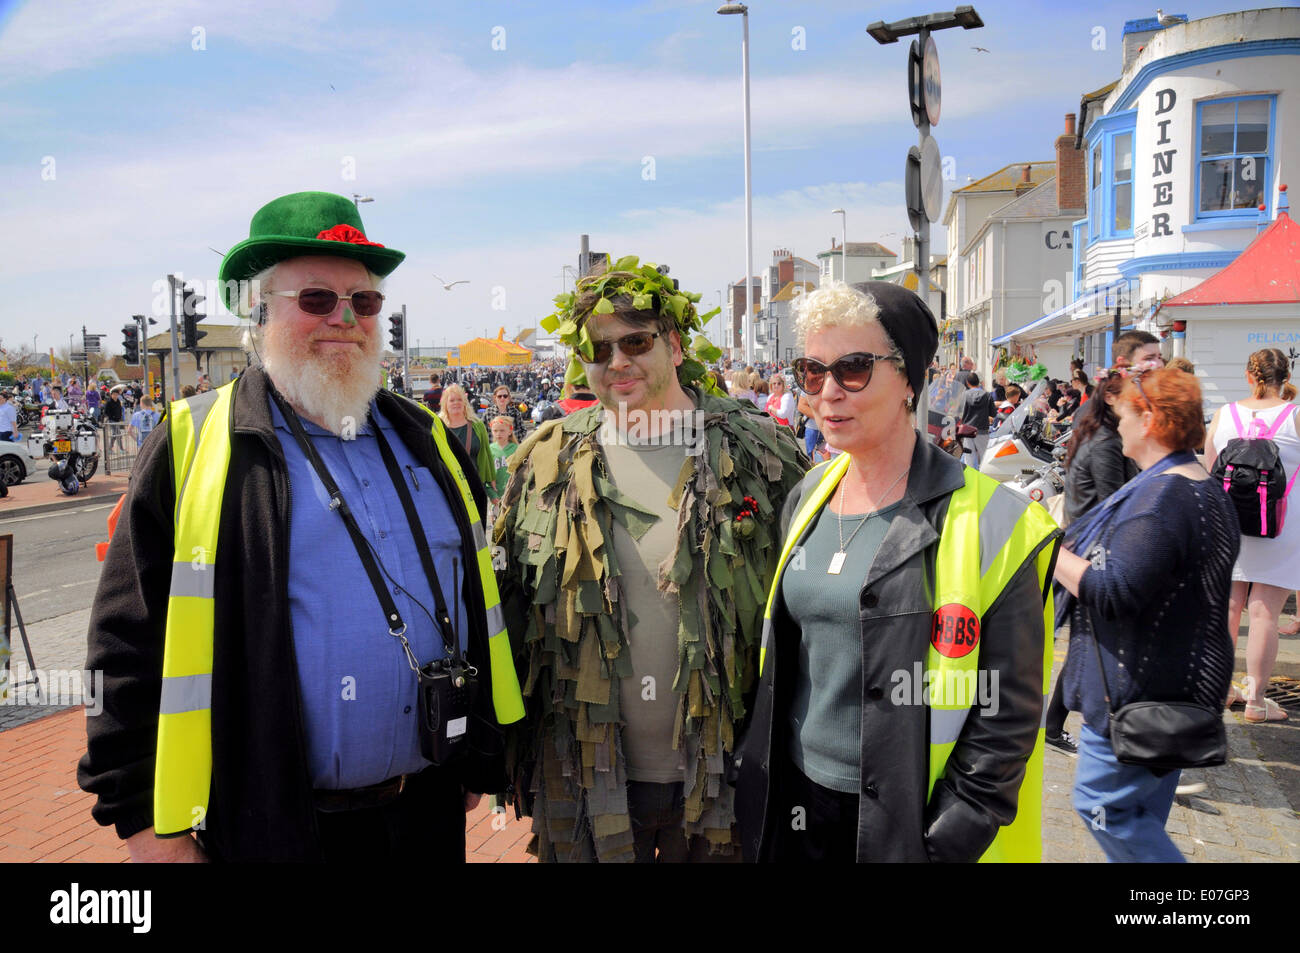 Hastings, East Sussex, UK.5 May 2014.Bike 1066 and Jack in the Green on a glorious Spring day on the East Sussex Coast. Thousands of bikers descended on Hastings to join the traditional Jack in the Green celebrations. . Stock Photo